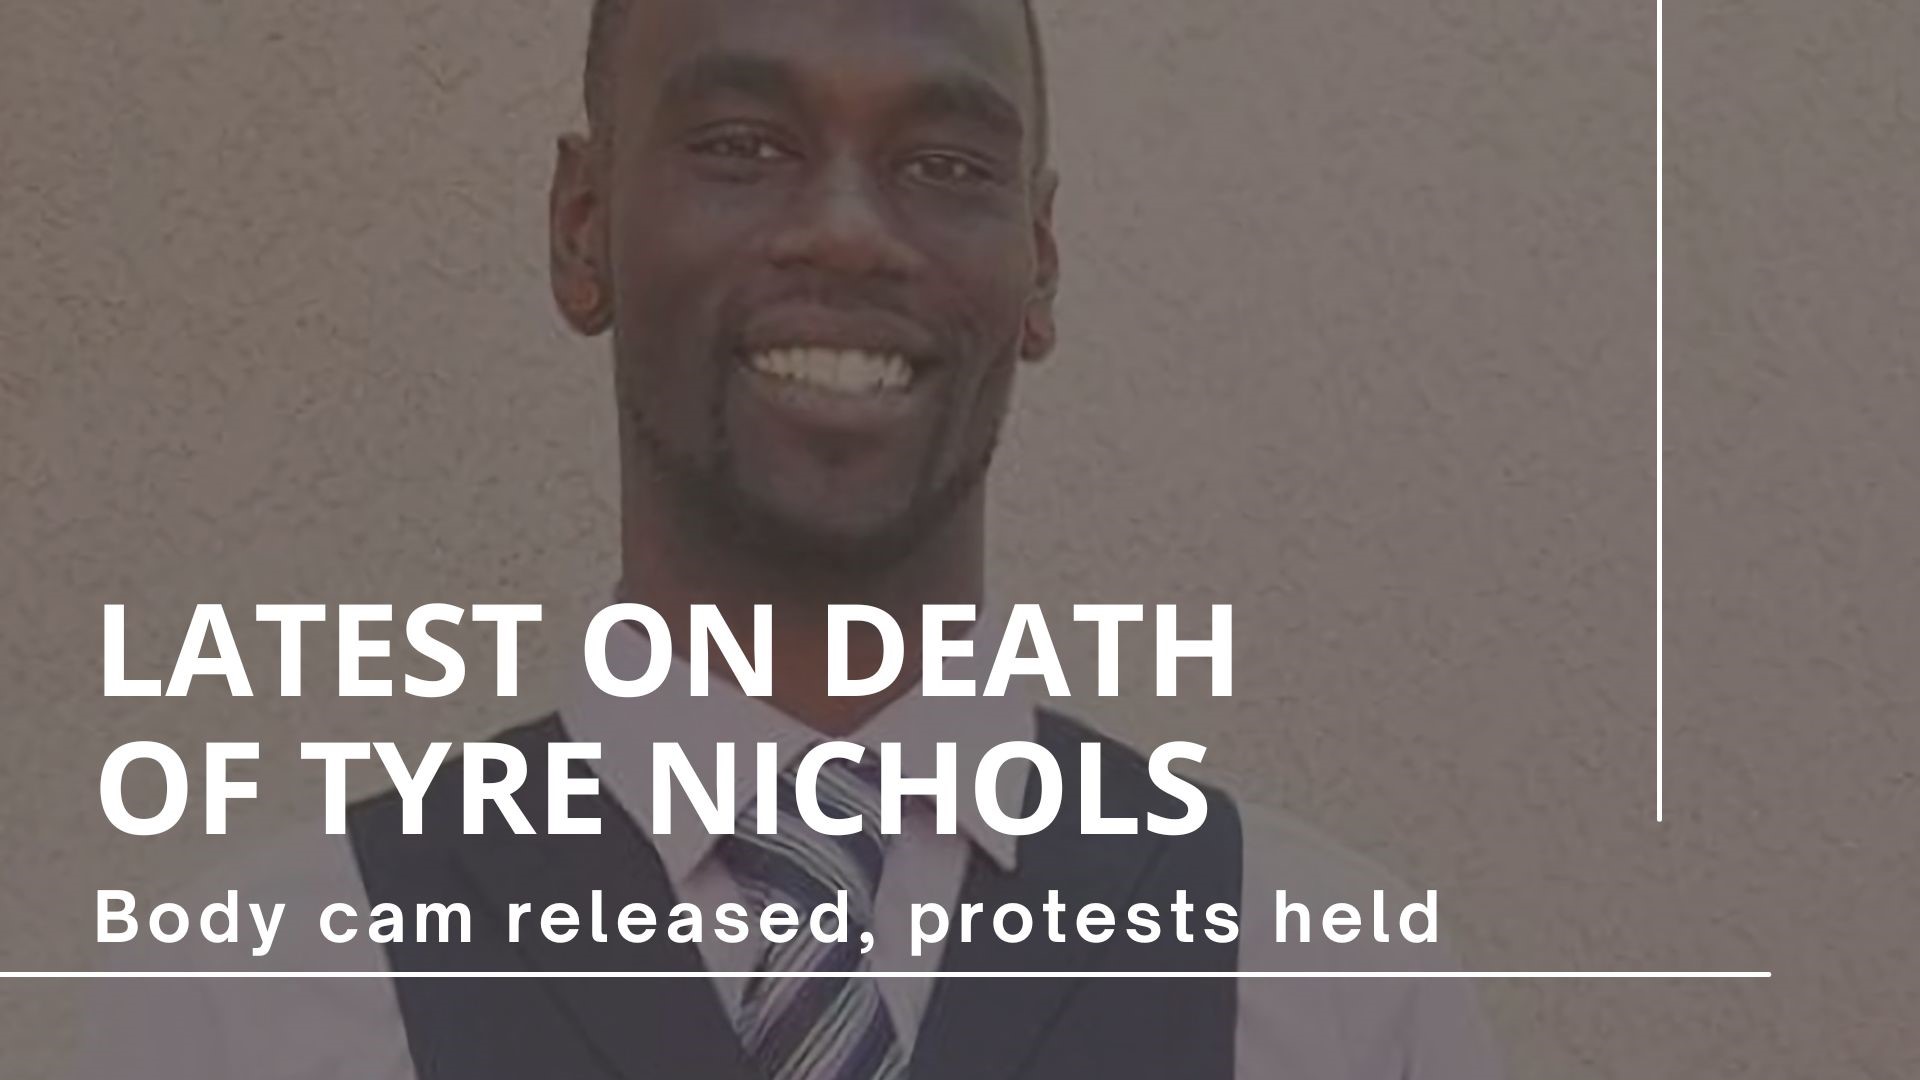 Protests around the country held following release of Tyre Nichols arrest video in Memphis.